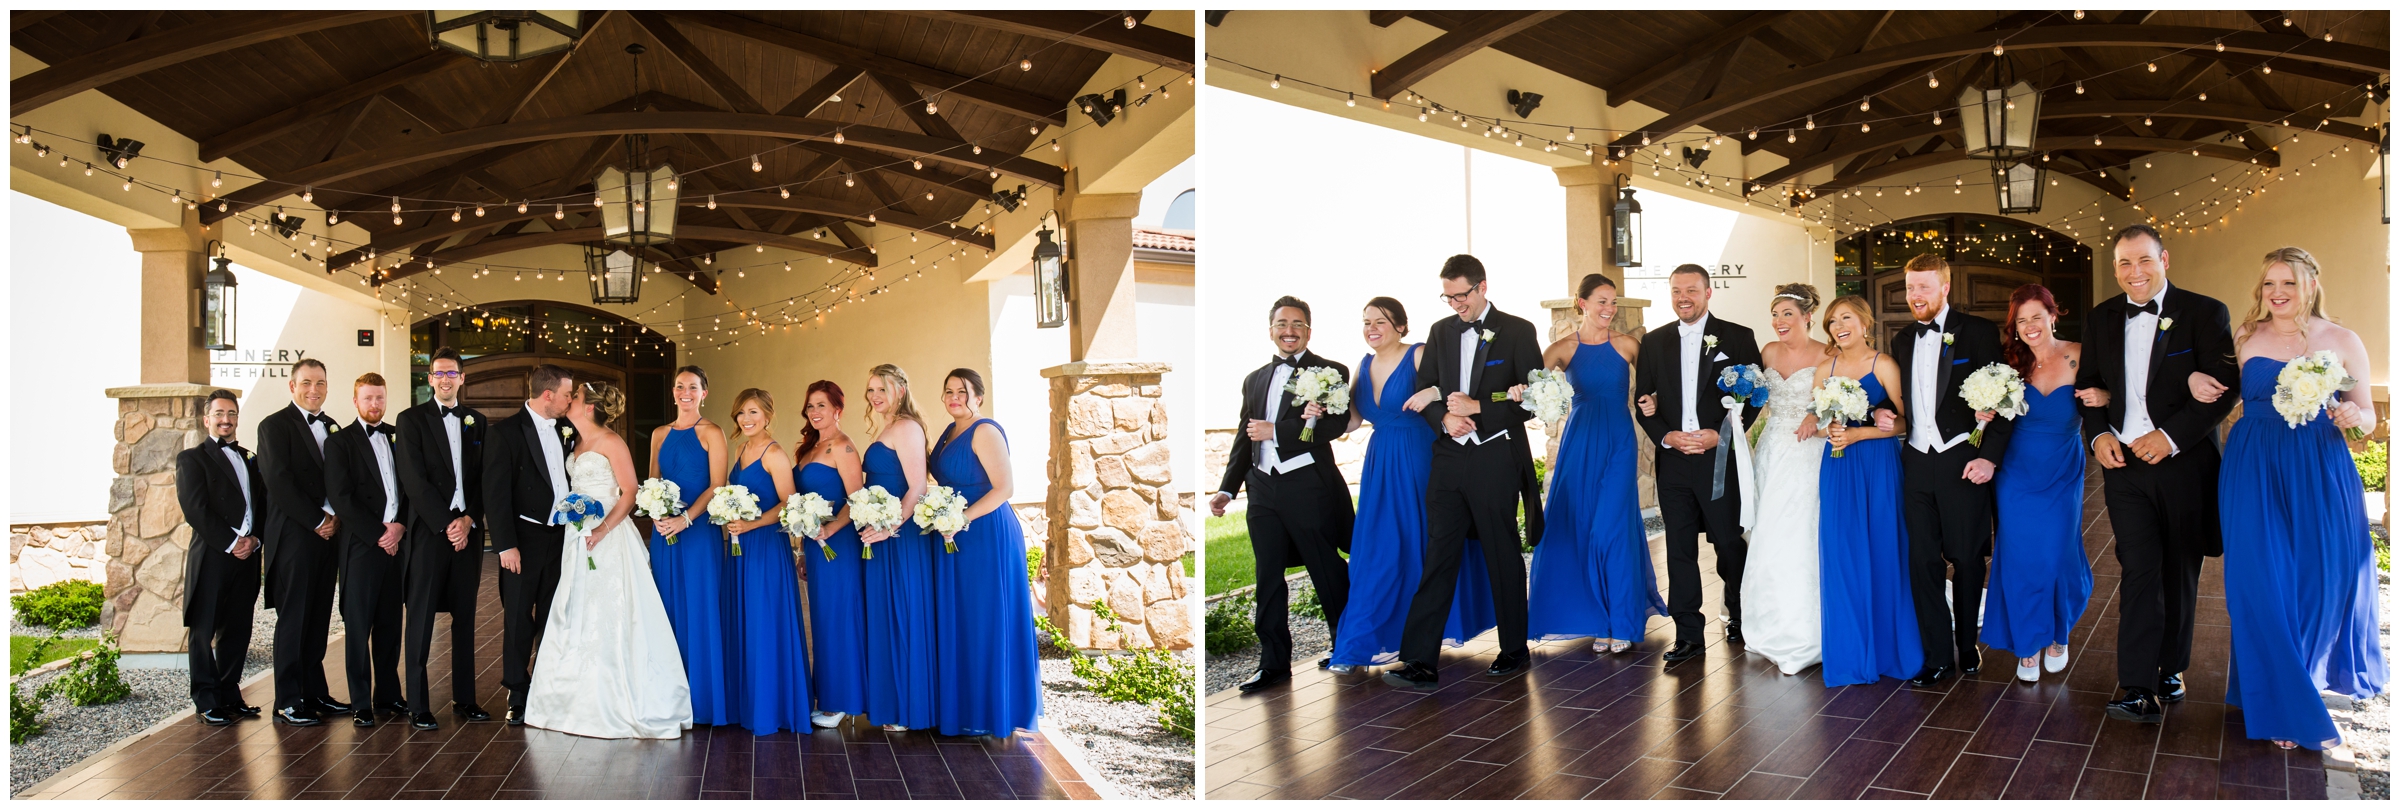 wedding party in royal blue and black posing in front of wooden doors at pinery on the hill 